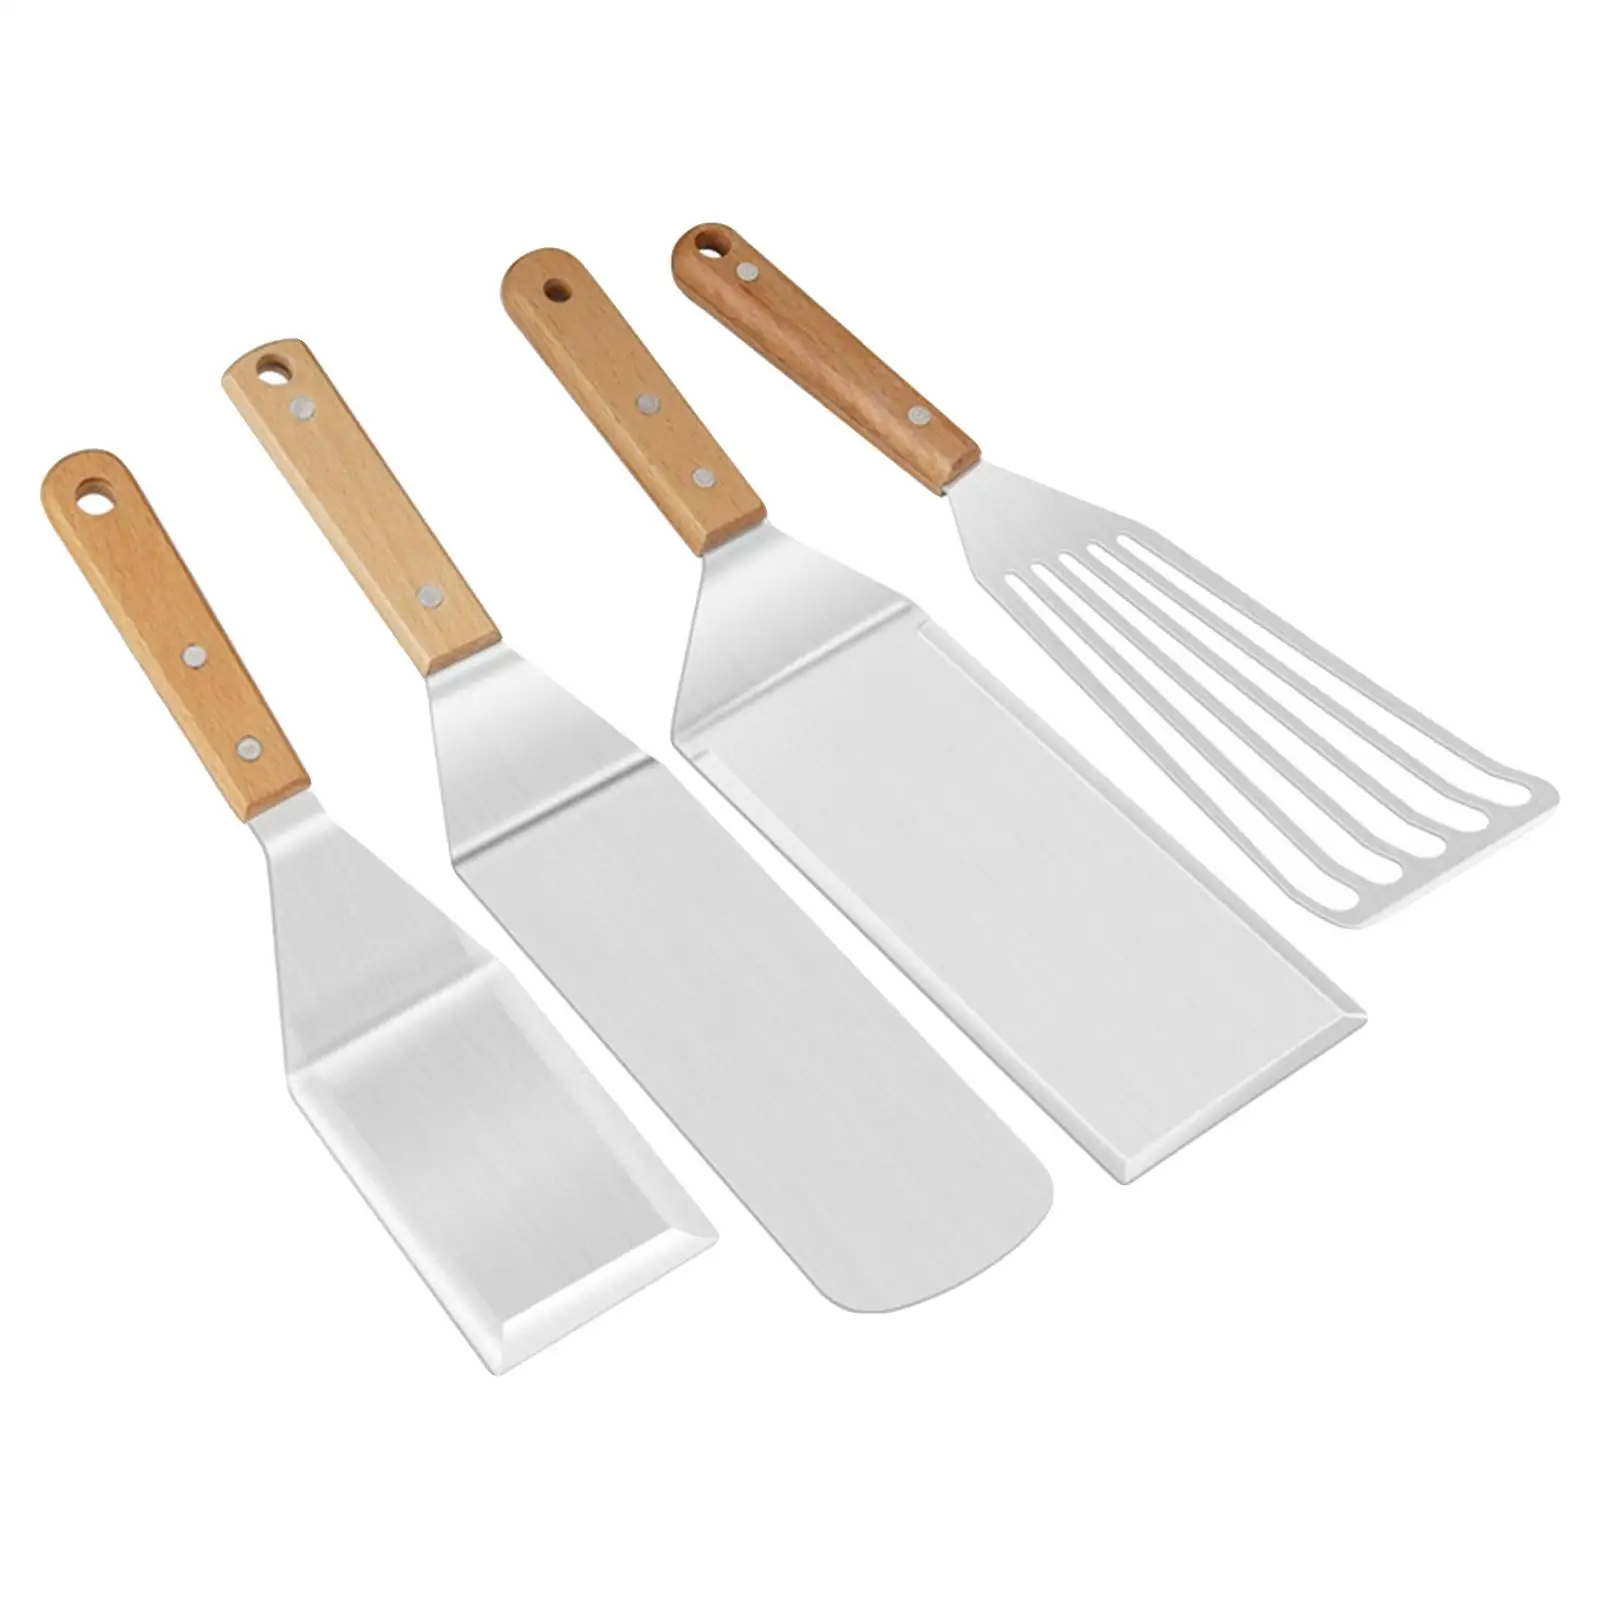 Stainless Steel Spatula Set - Griddle Scraper and Pancake or Hamburger Turner for BBQ Grill Flat Top